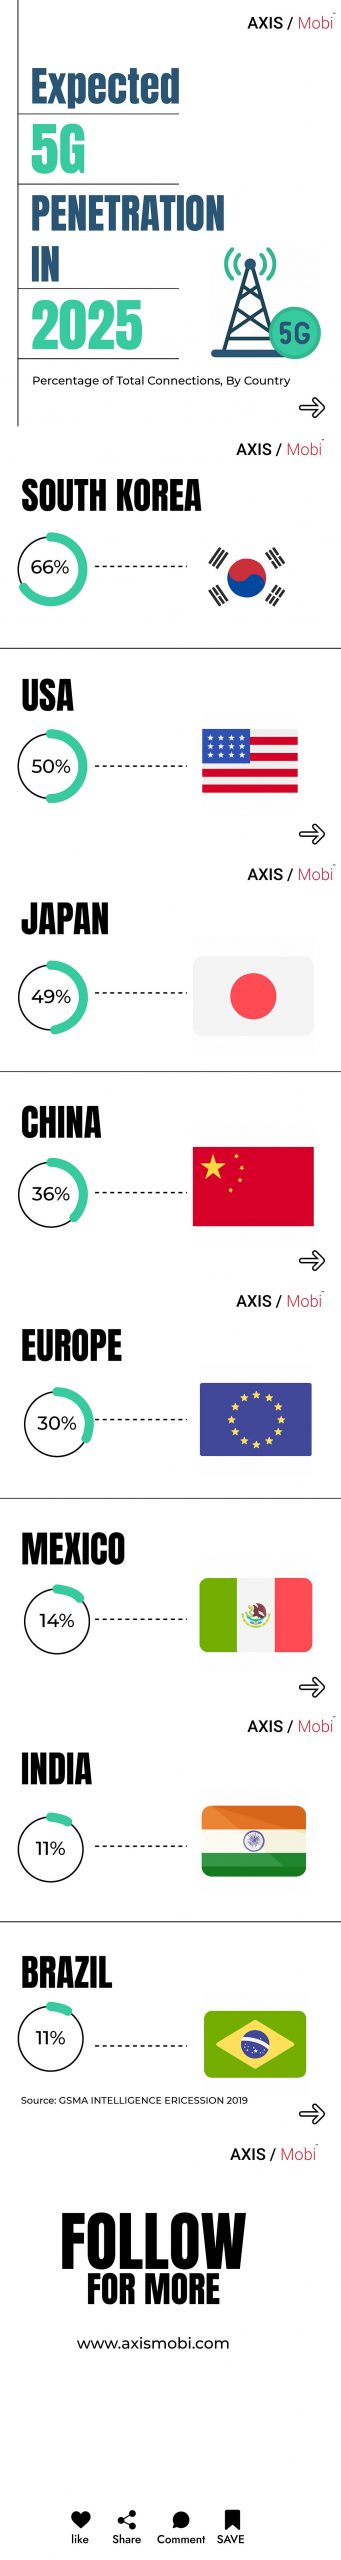 axis mobi expected 5g penetration in 2025 infographic